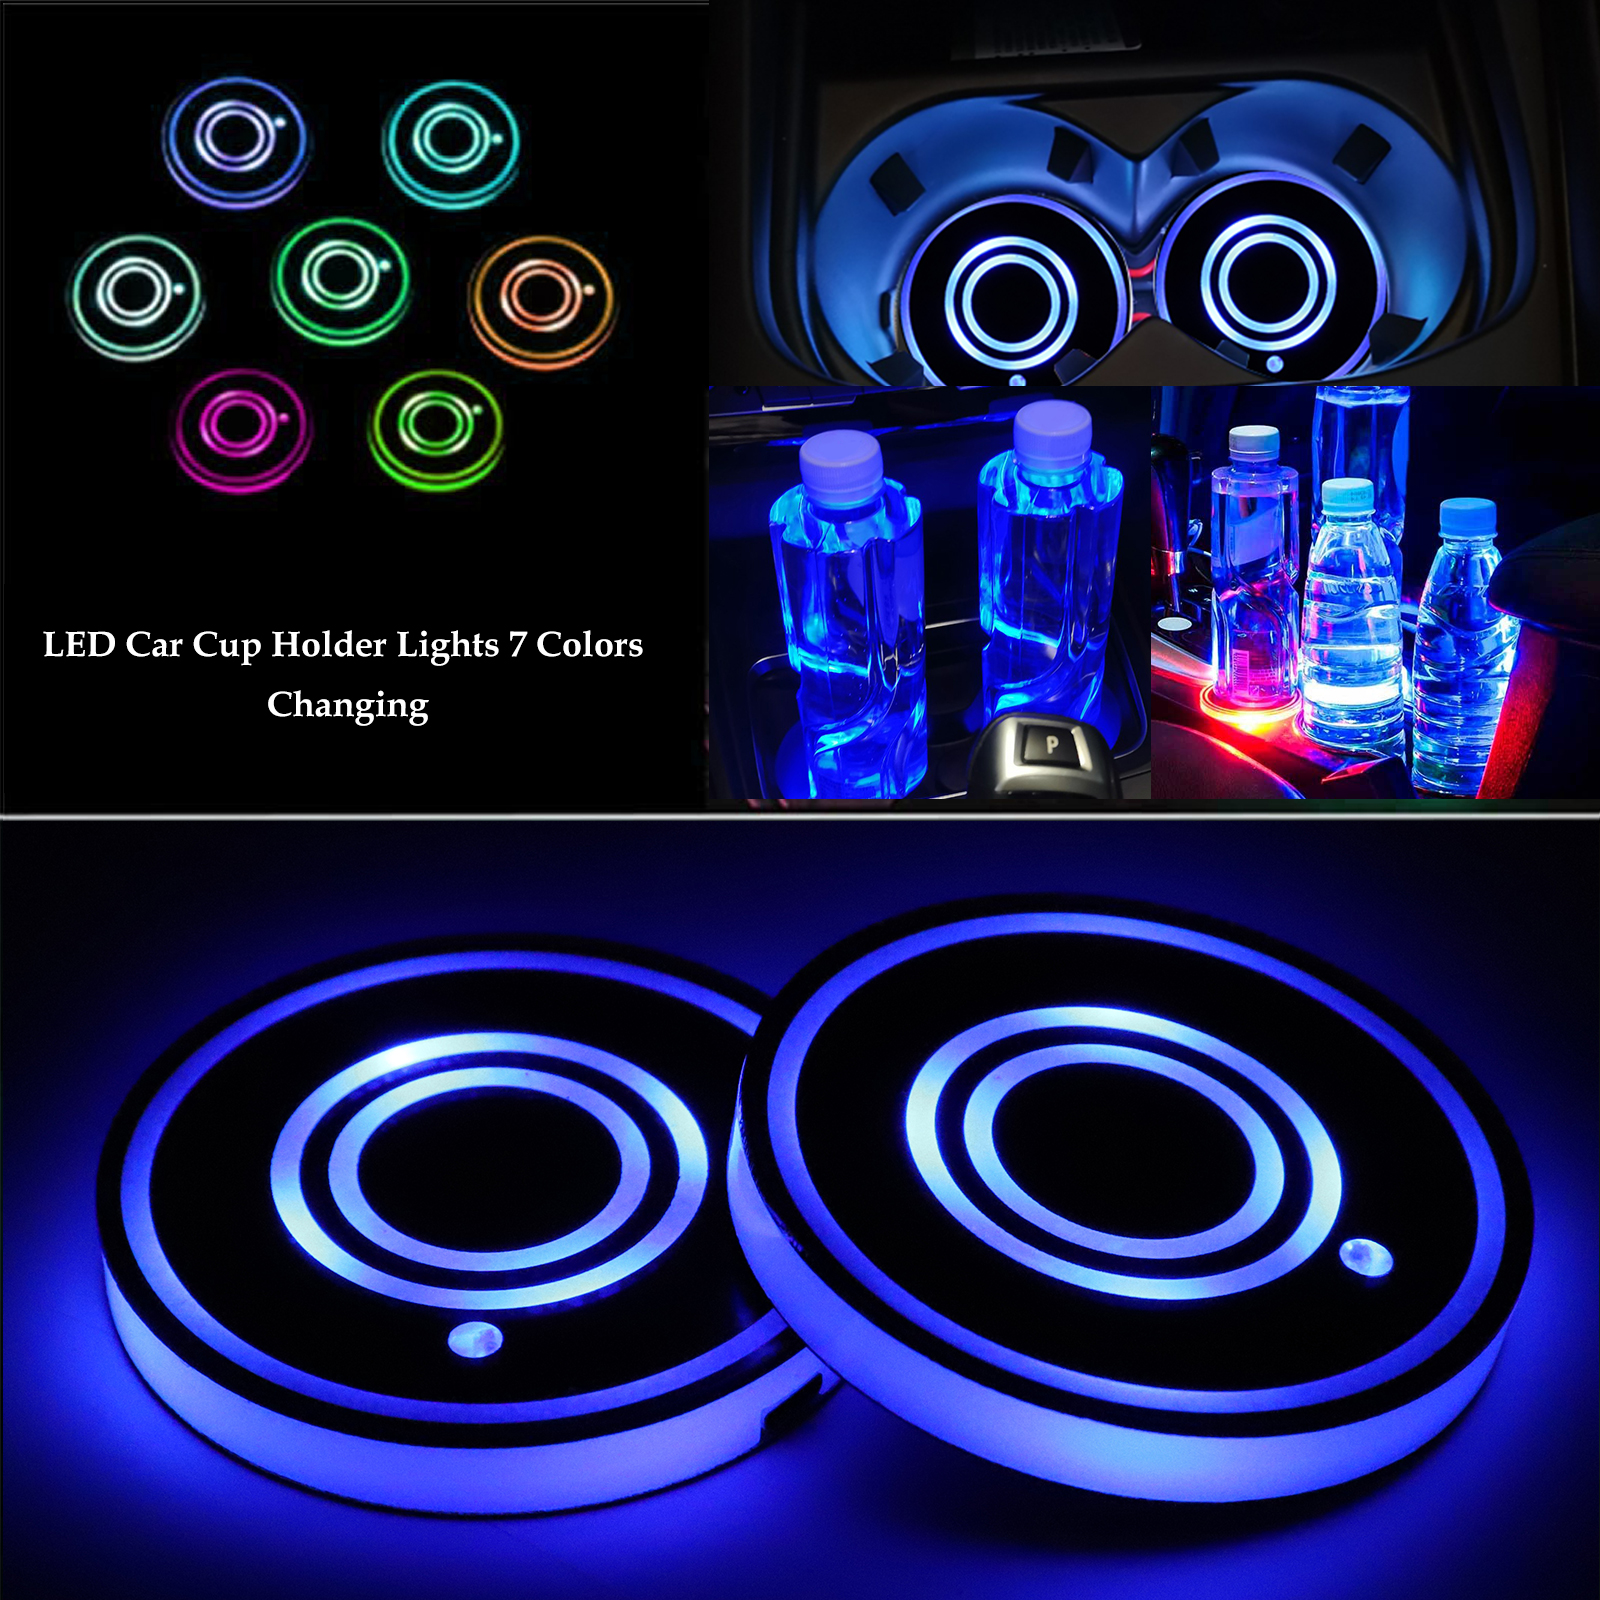 Car Cup Holder with RGB Les Lights Mini USB Rechargeable with Remote Control MASO 2x Colorful LED Car Cup Carpets Mat Pad With Waterproof Bottle Drinks Coaster Built-in Lamp 